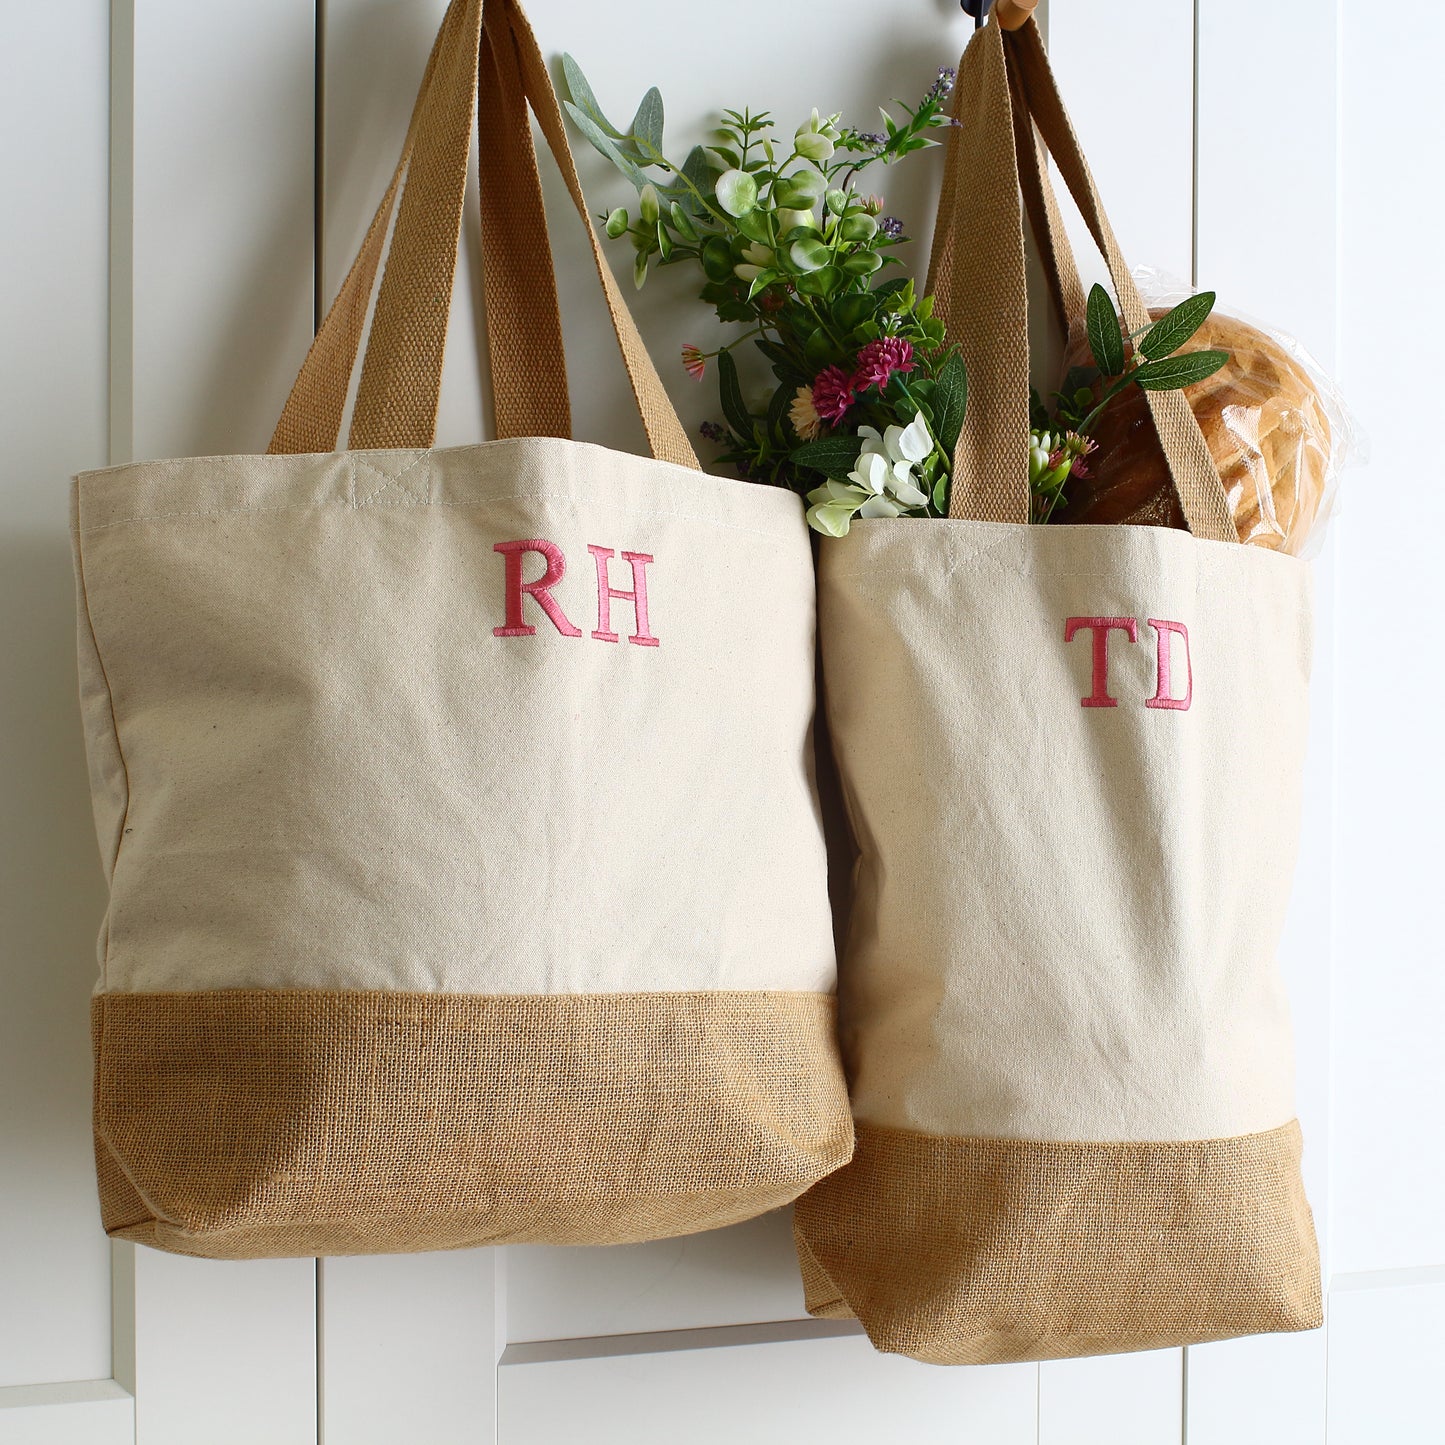 NEW - Embroidered Cotton Canvas Tote Bag - Initials